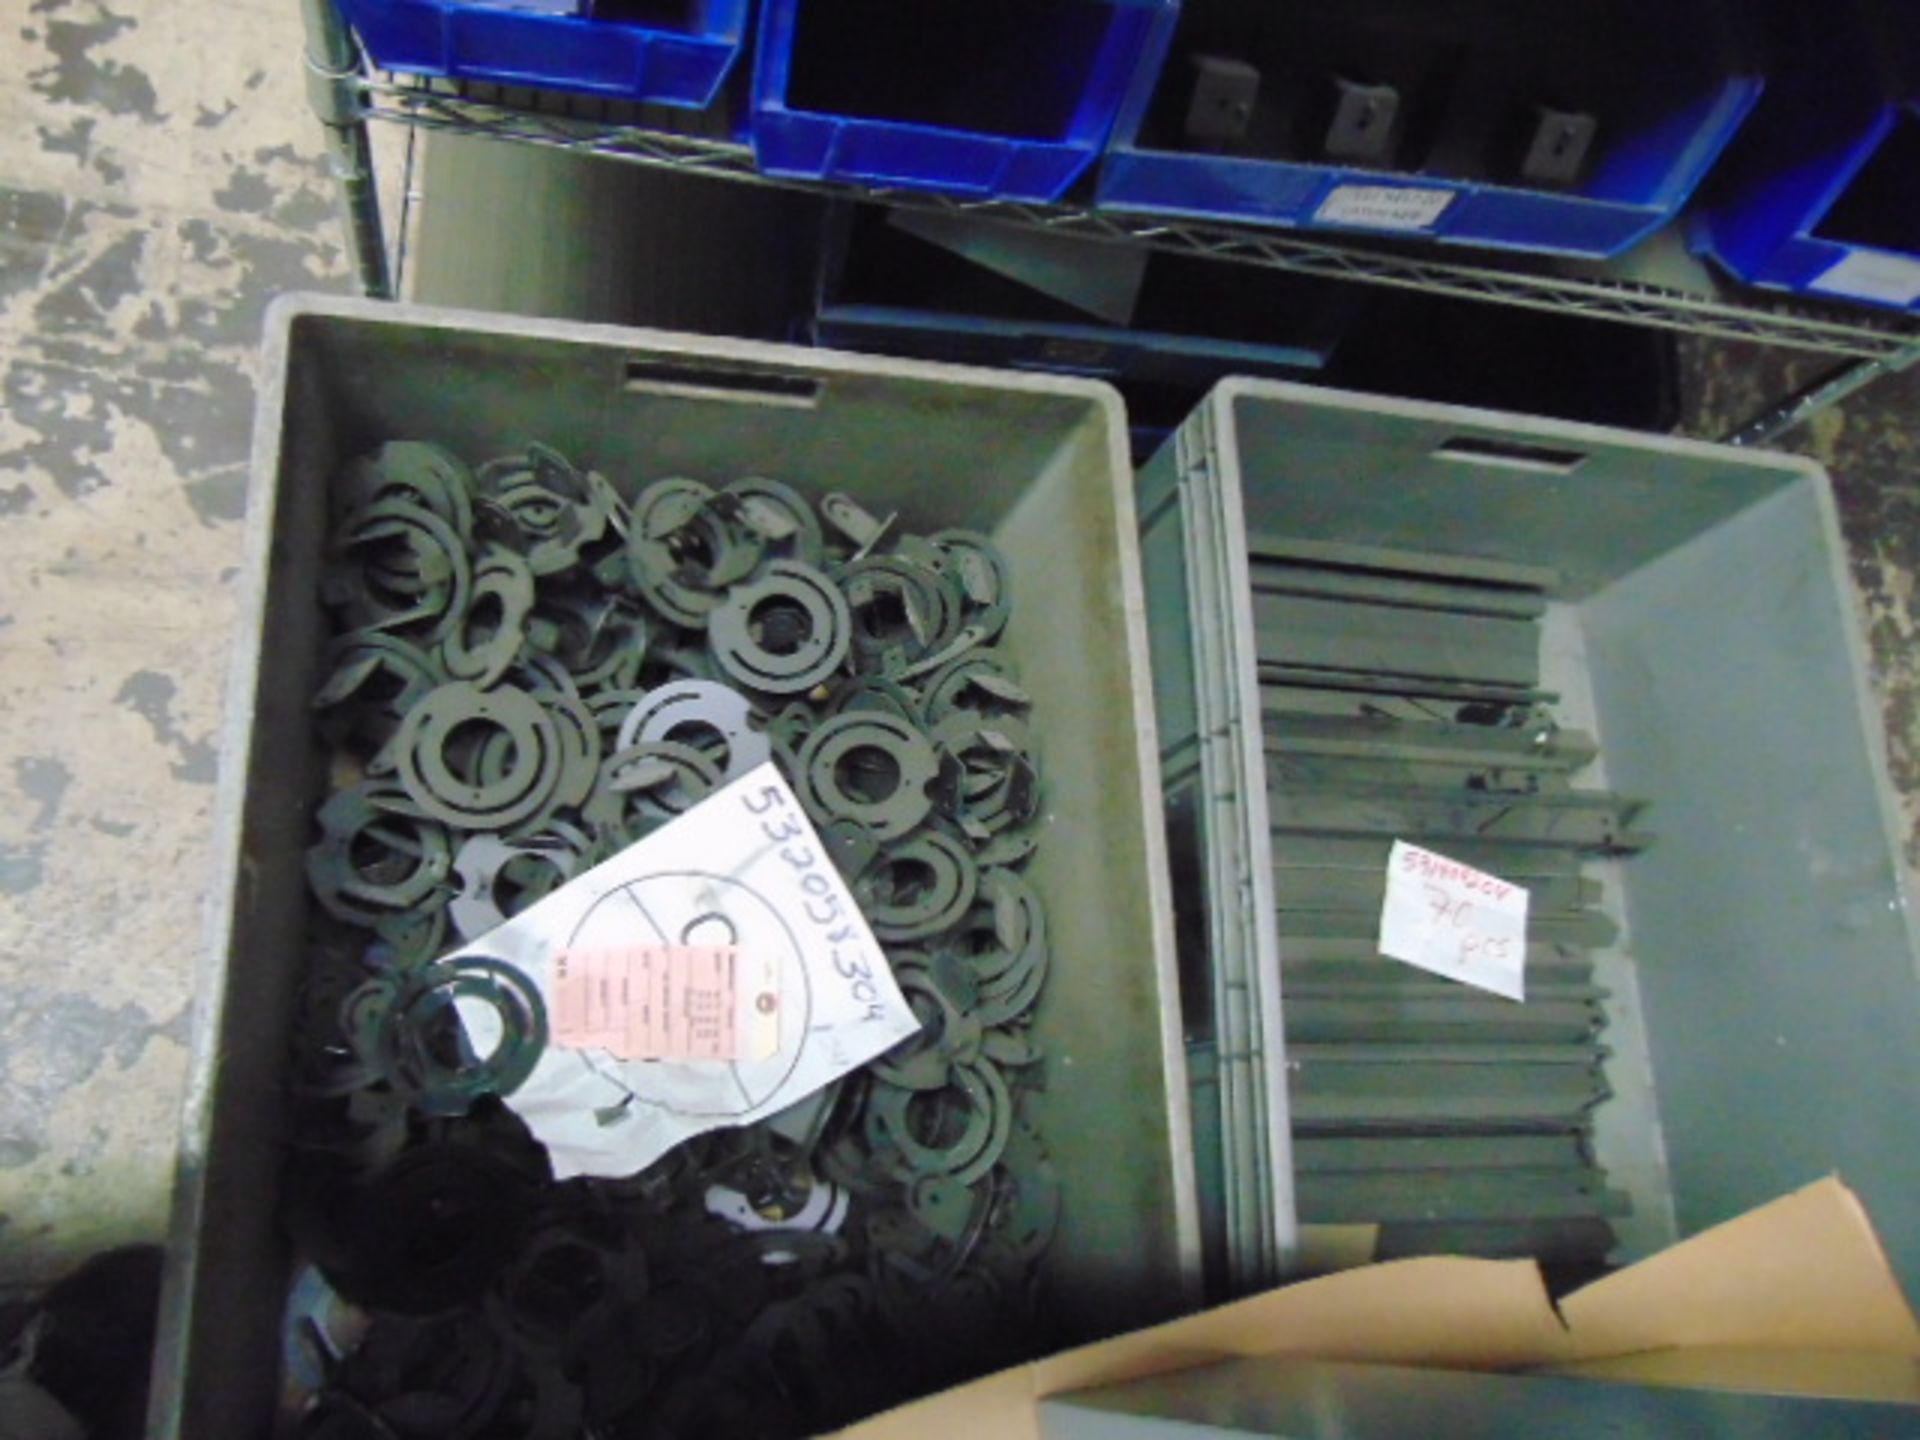 LOT CONSISTING OF: assorted springs, printer labels, key boxes, assorted steel parts, box frames, - Image 14 of 31